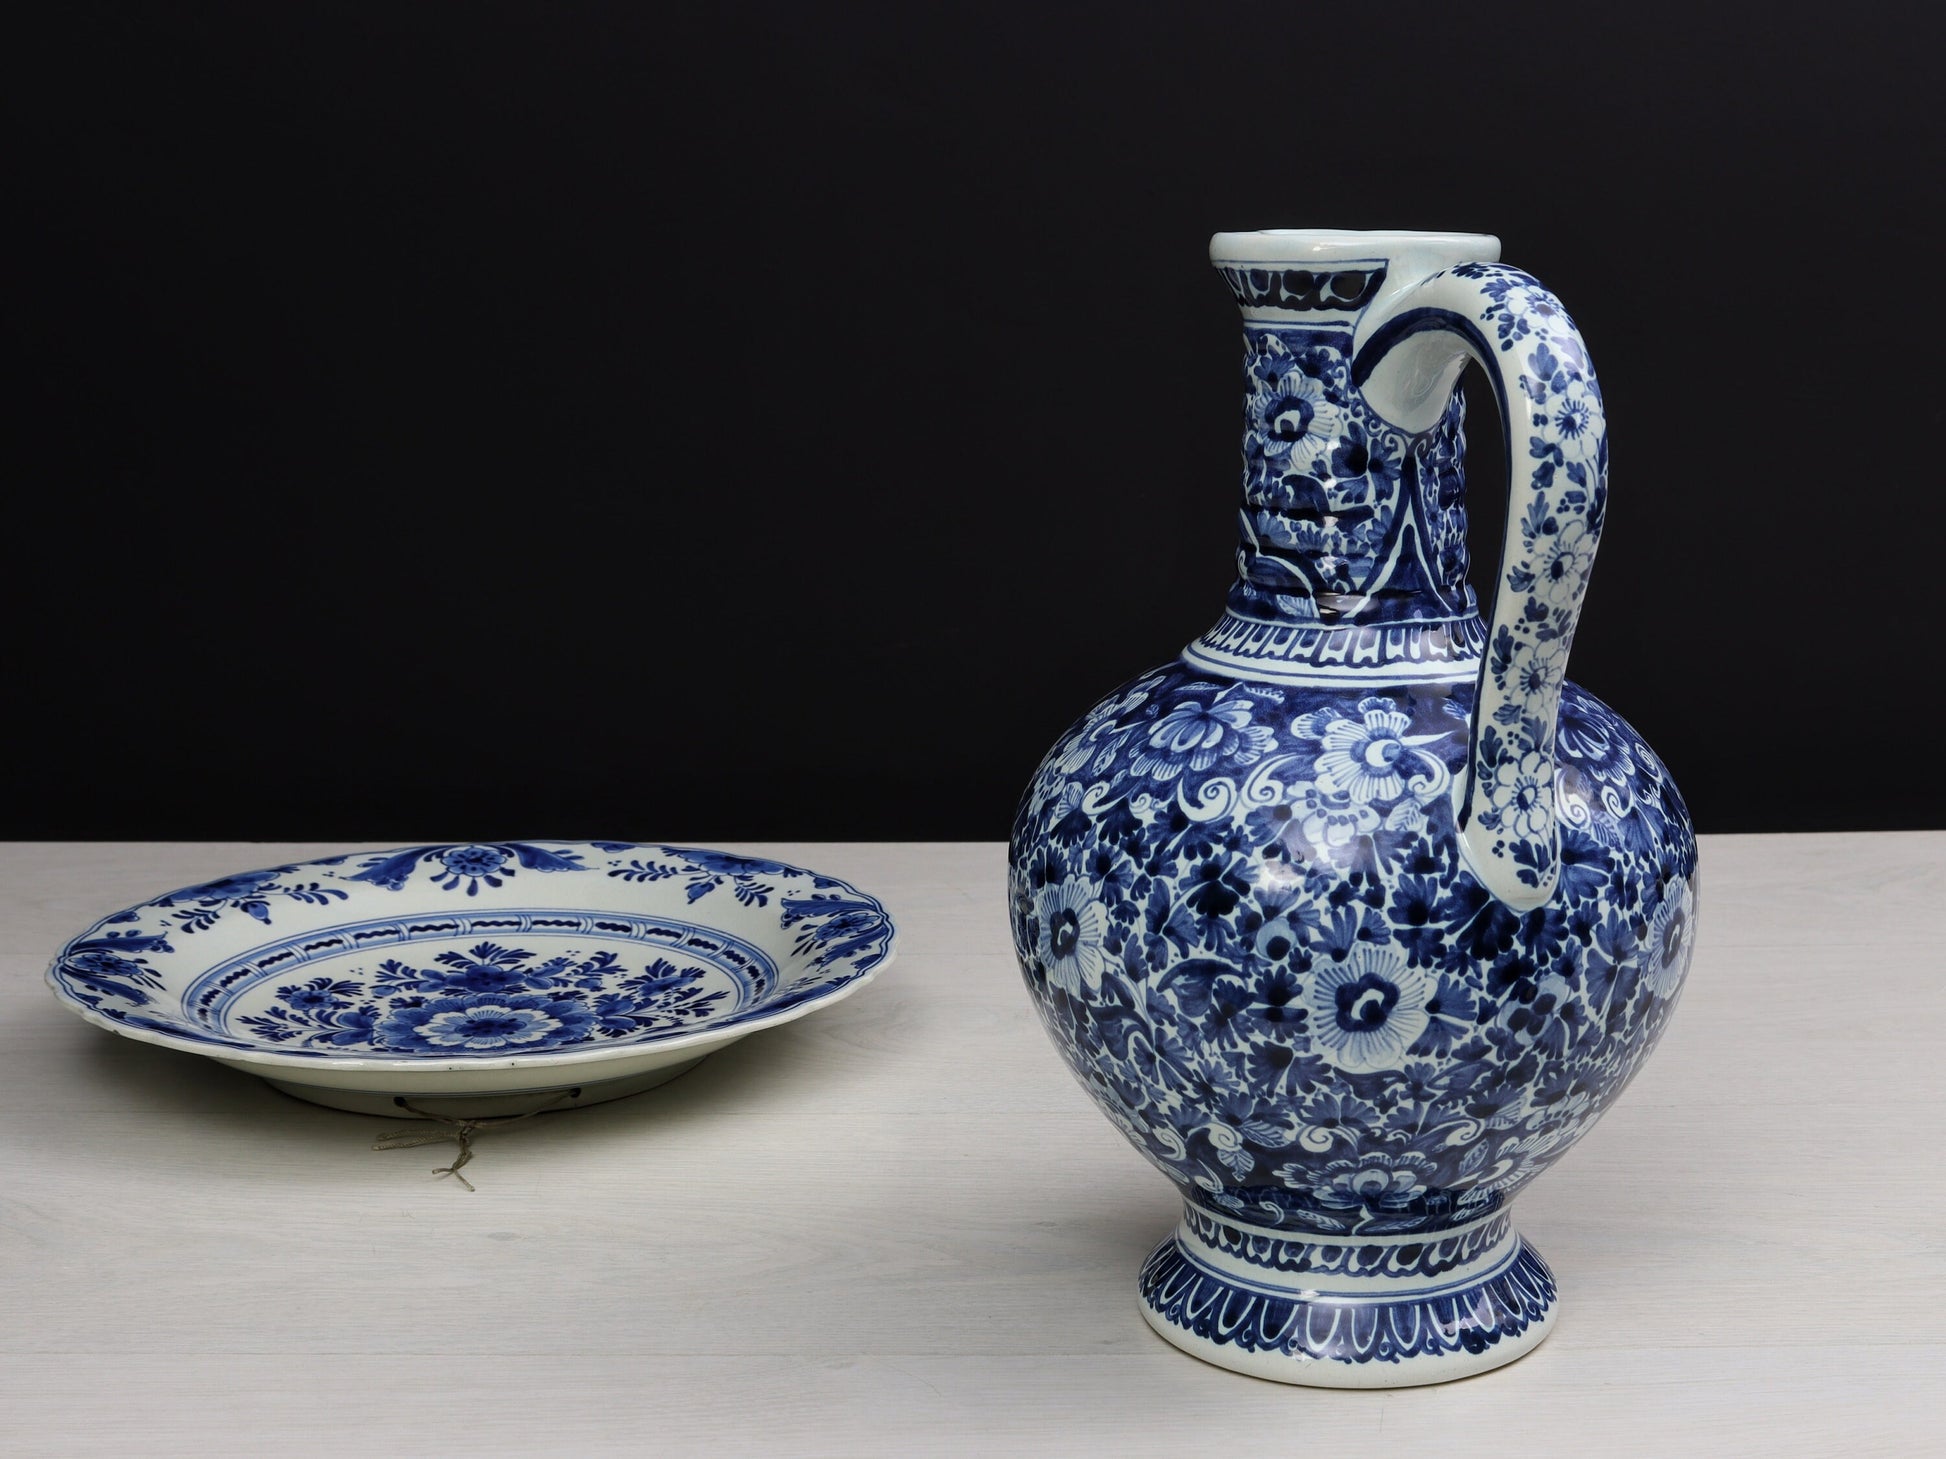 Delft Blue and White Pottery Set | Delftware Charger Plate and Pitcher | Vintage Home Decor